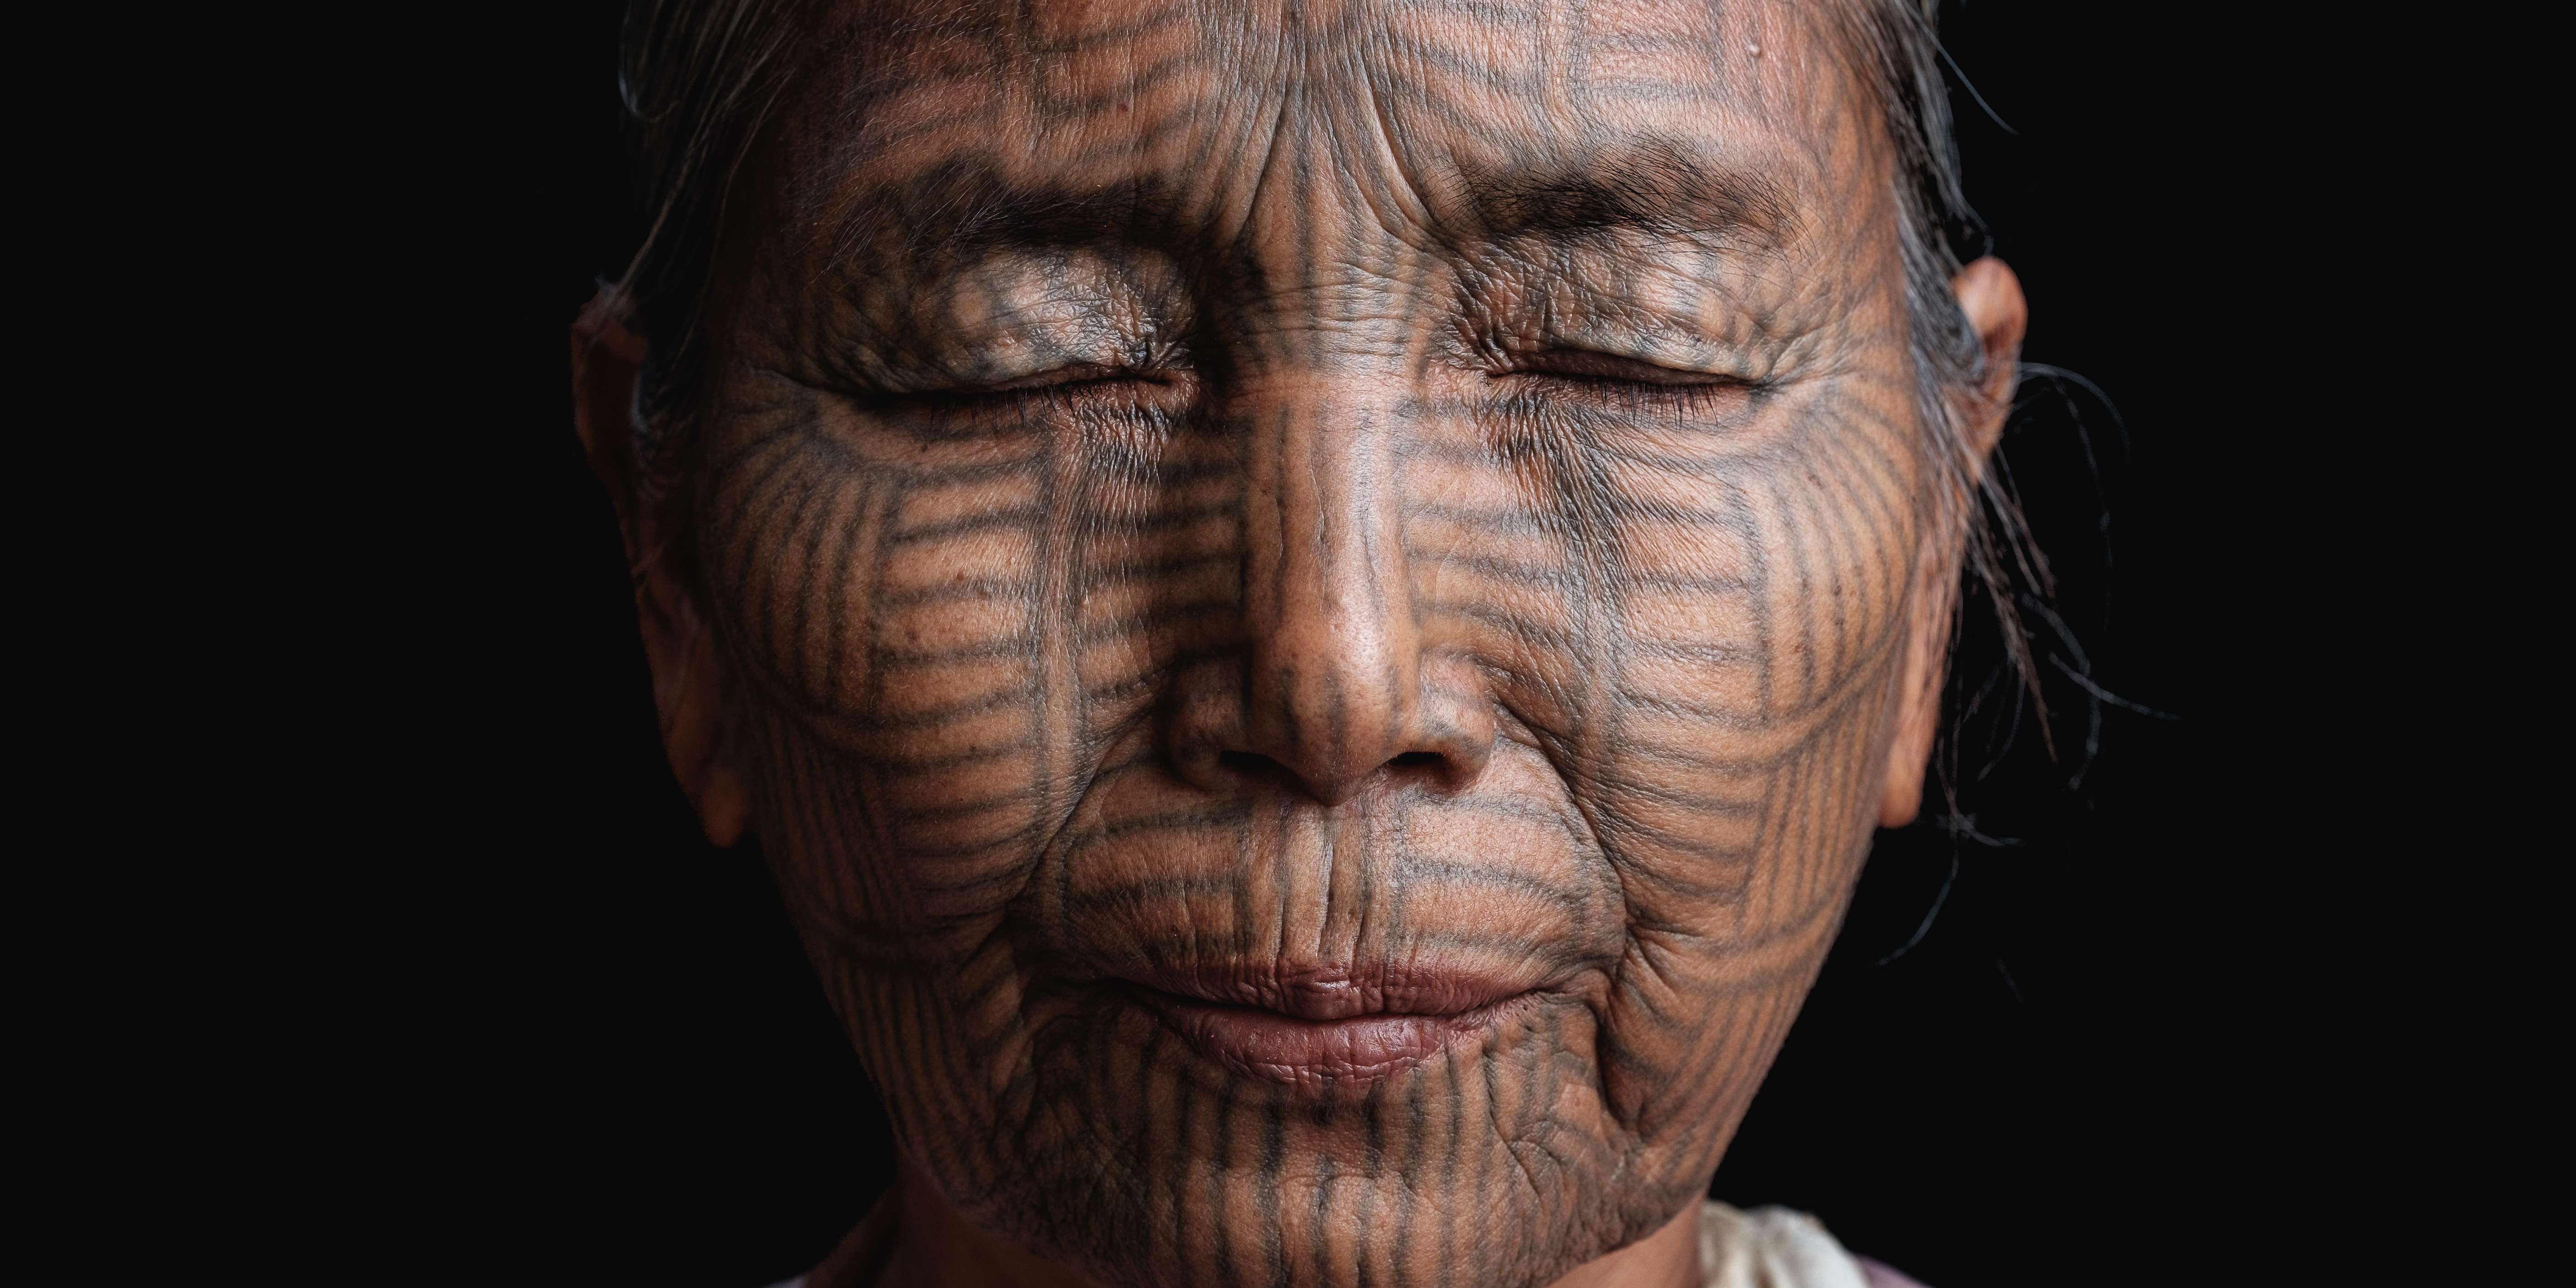 Bant Tone was nine years old when she was tattooed, and clearly remembers the pain of the day. She thought she was exceptionally pretty after she got her tattoo, and was pleased that she was now considered a woman. She also felt pride, as the other peoples of Myanmar were envious of her tribe’s tattooed faces. Photos: Dylan Goldby